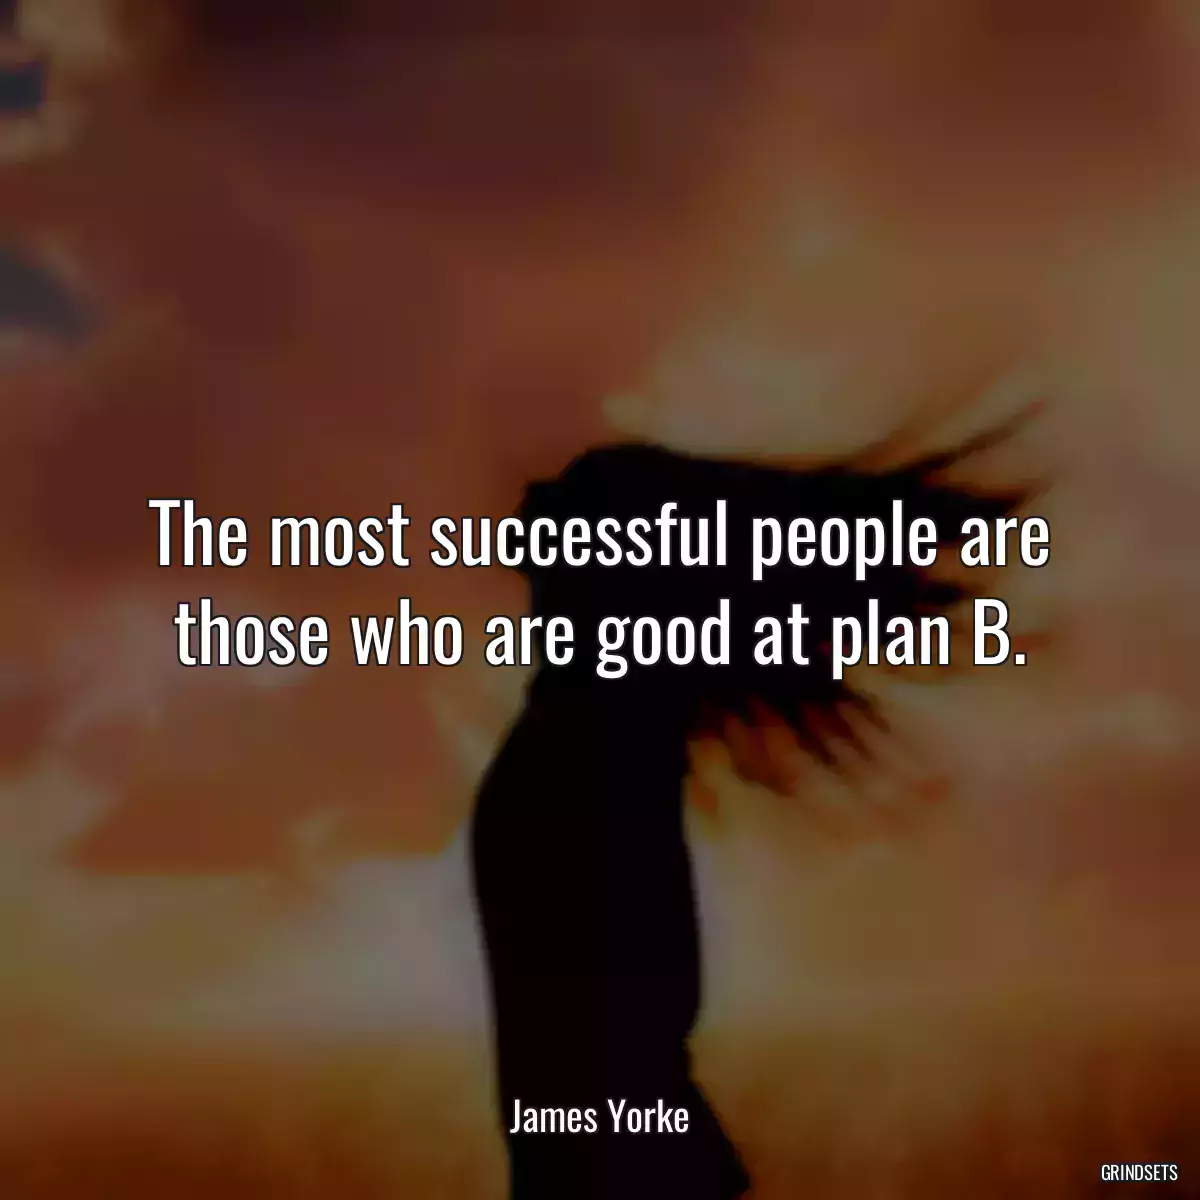 The most successful people are those who are good at plan B.